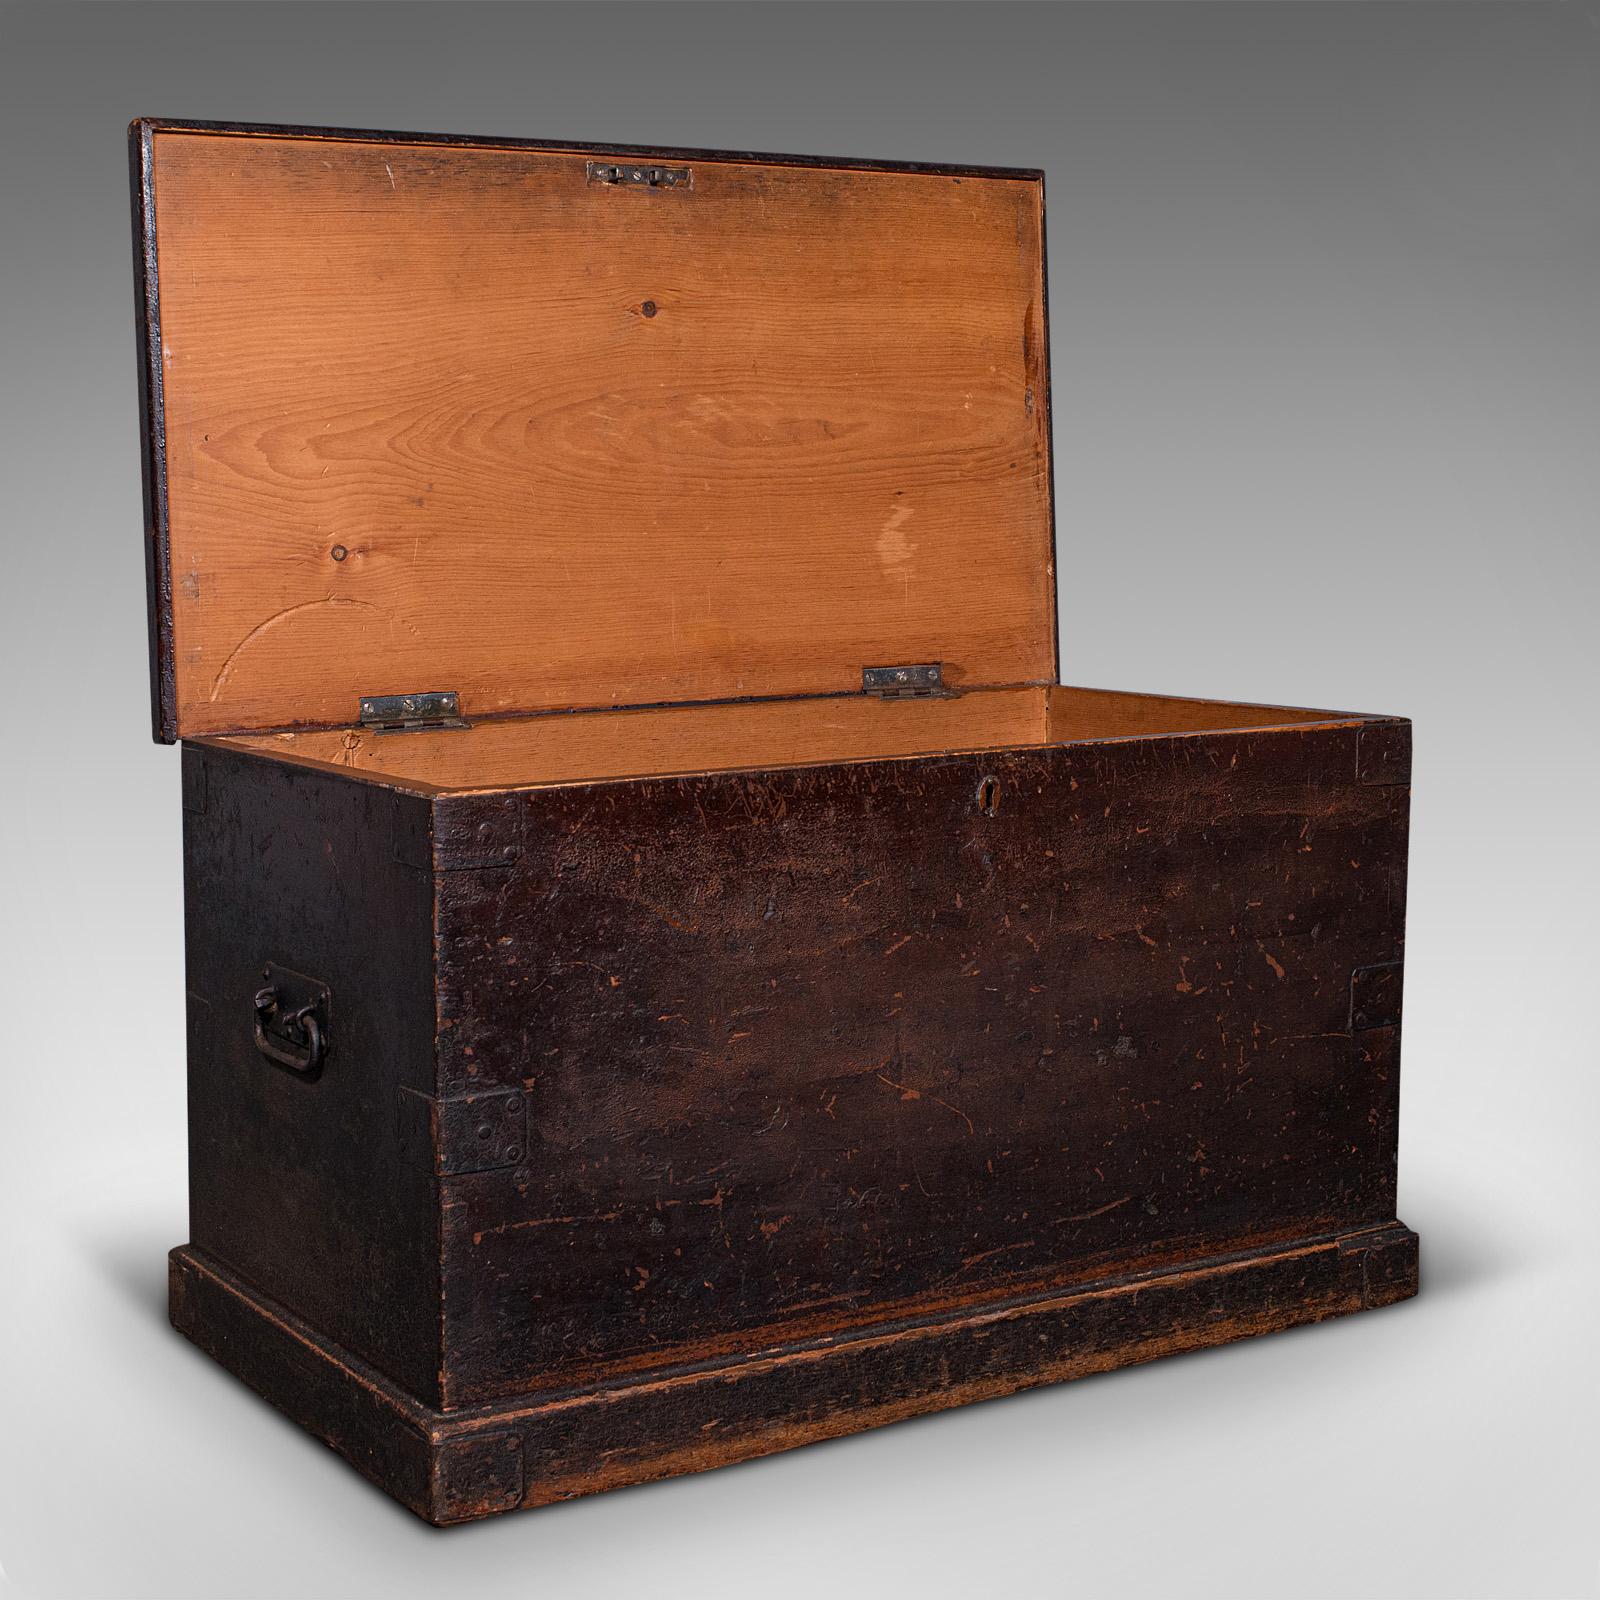 This is a large antique shipping trunk. An English, stained pine travel or tool chest, dating to the Victorian period, circa 1880.

Of generous size for voyages beyond the sea or near to home
Displays a desirable aged patina with weathered